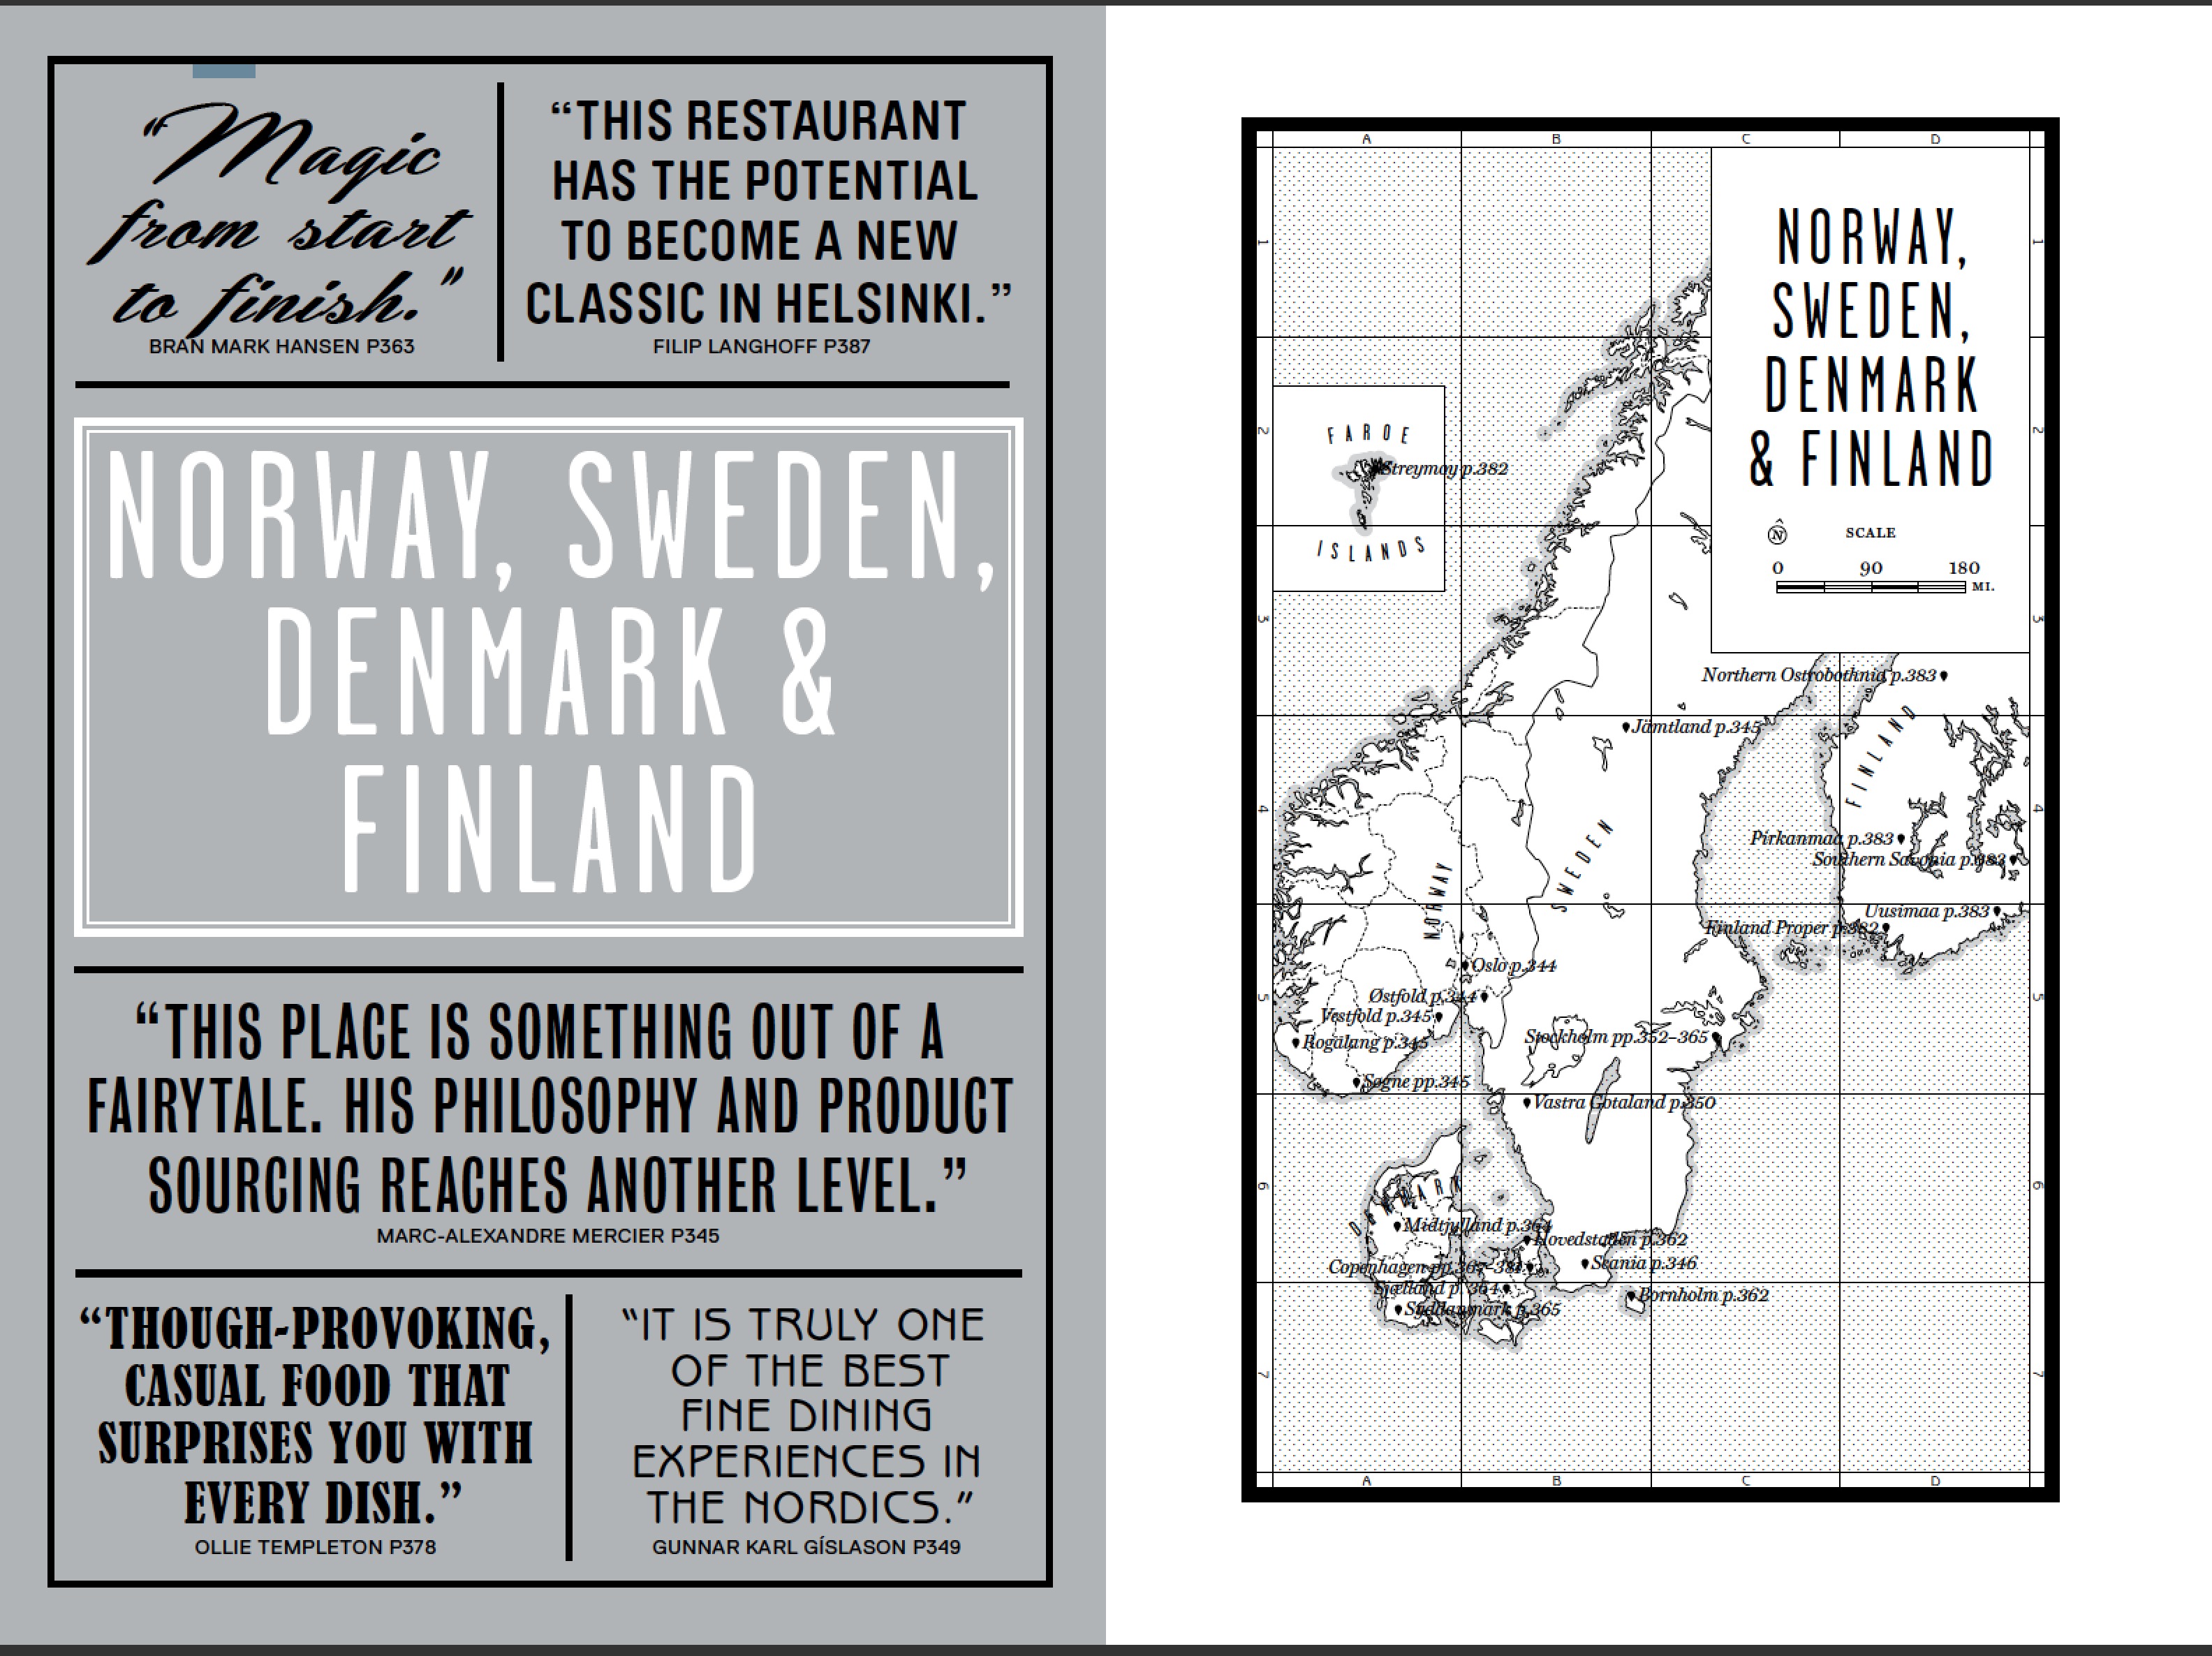 The Norway, Sweden, Denmark and Finland introduction from our new book Where Chefs Eat